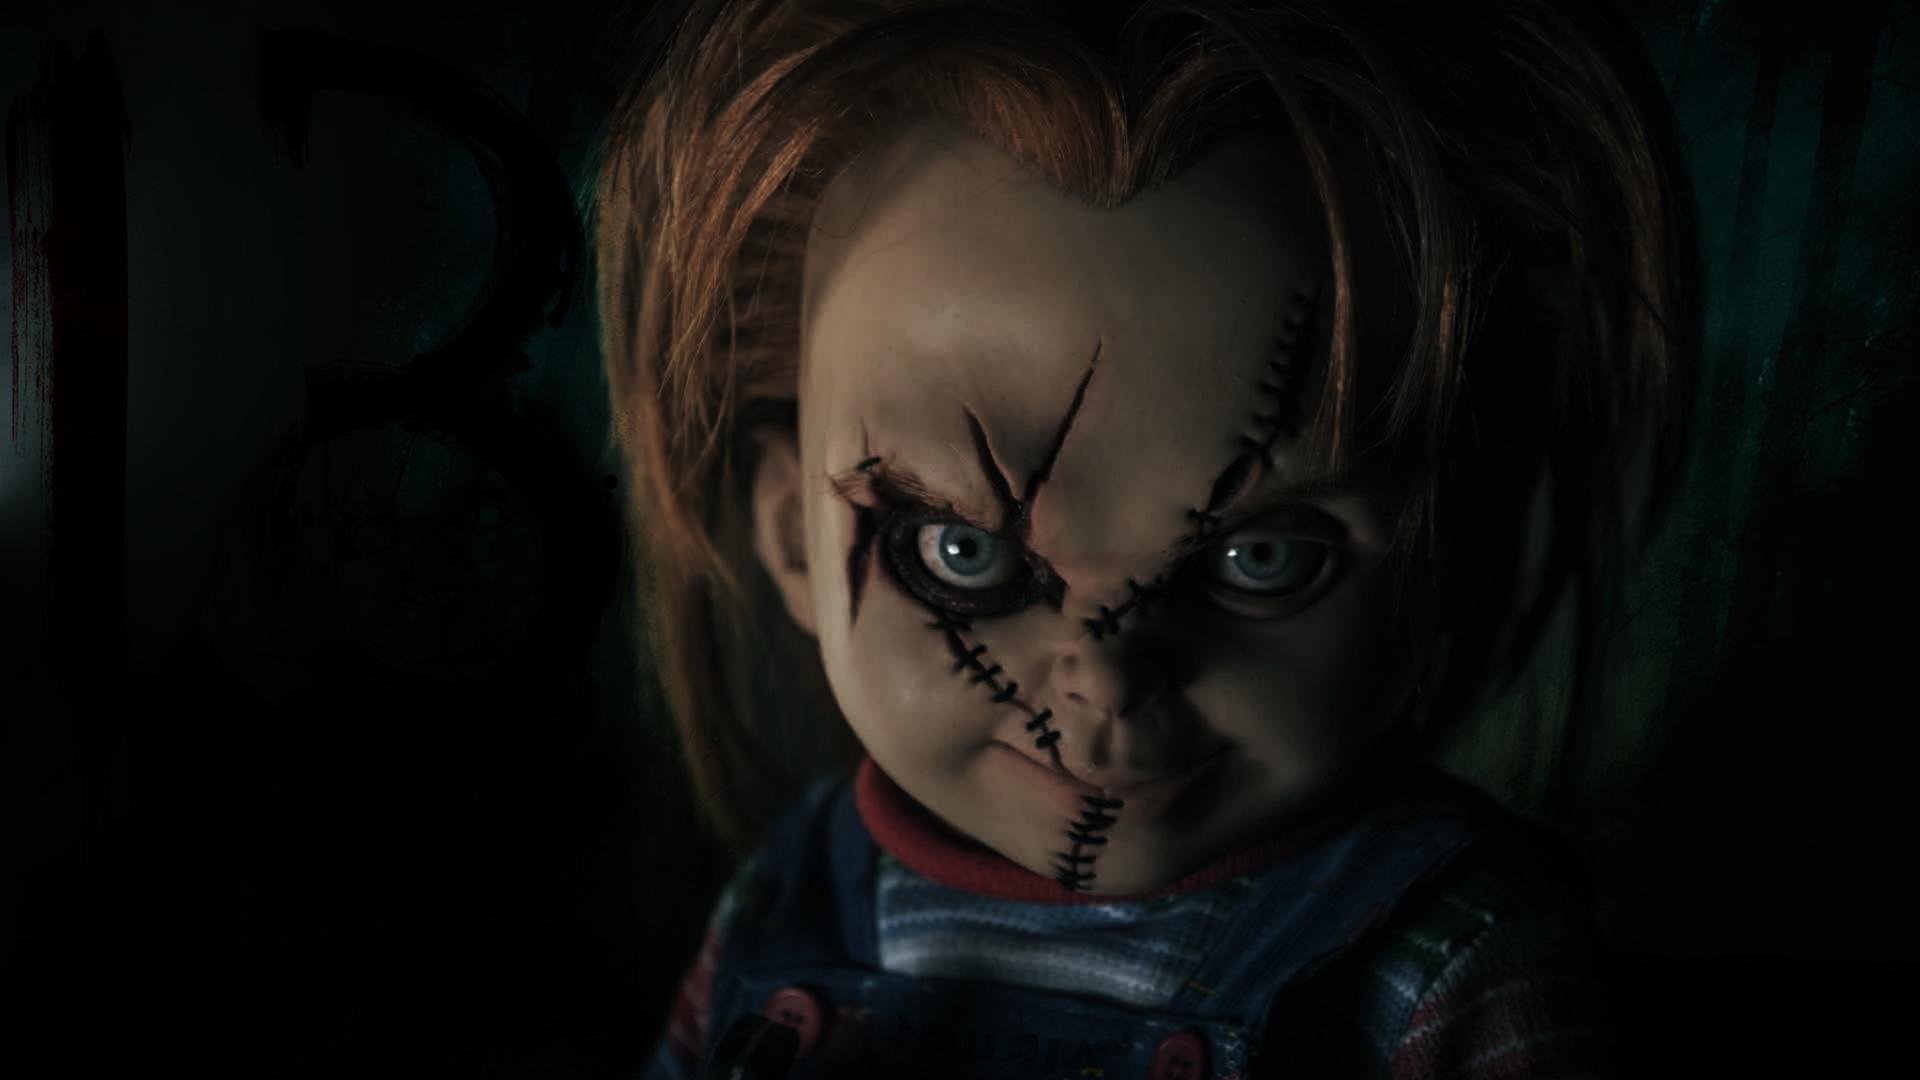 image For > Chucky Doll Wallpaper